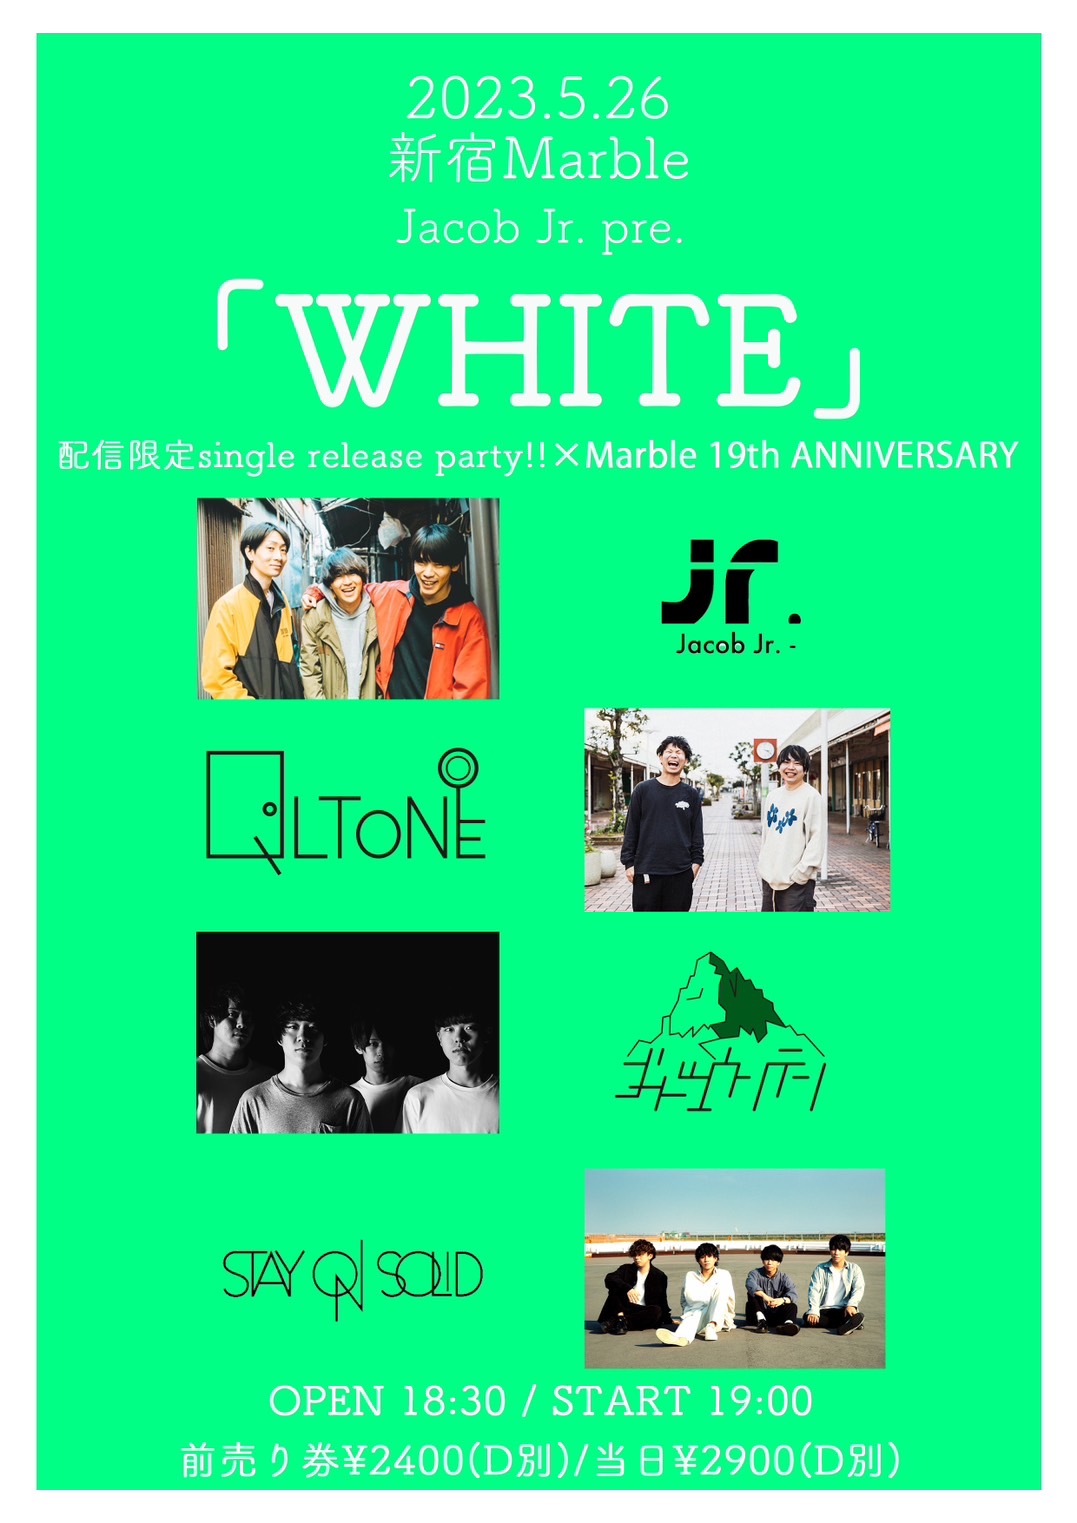 Jacob Jr. pre.配信限定single release party!!「WHITE」- Marble 19th ANNIVERSARY -